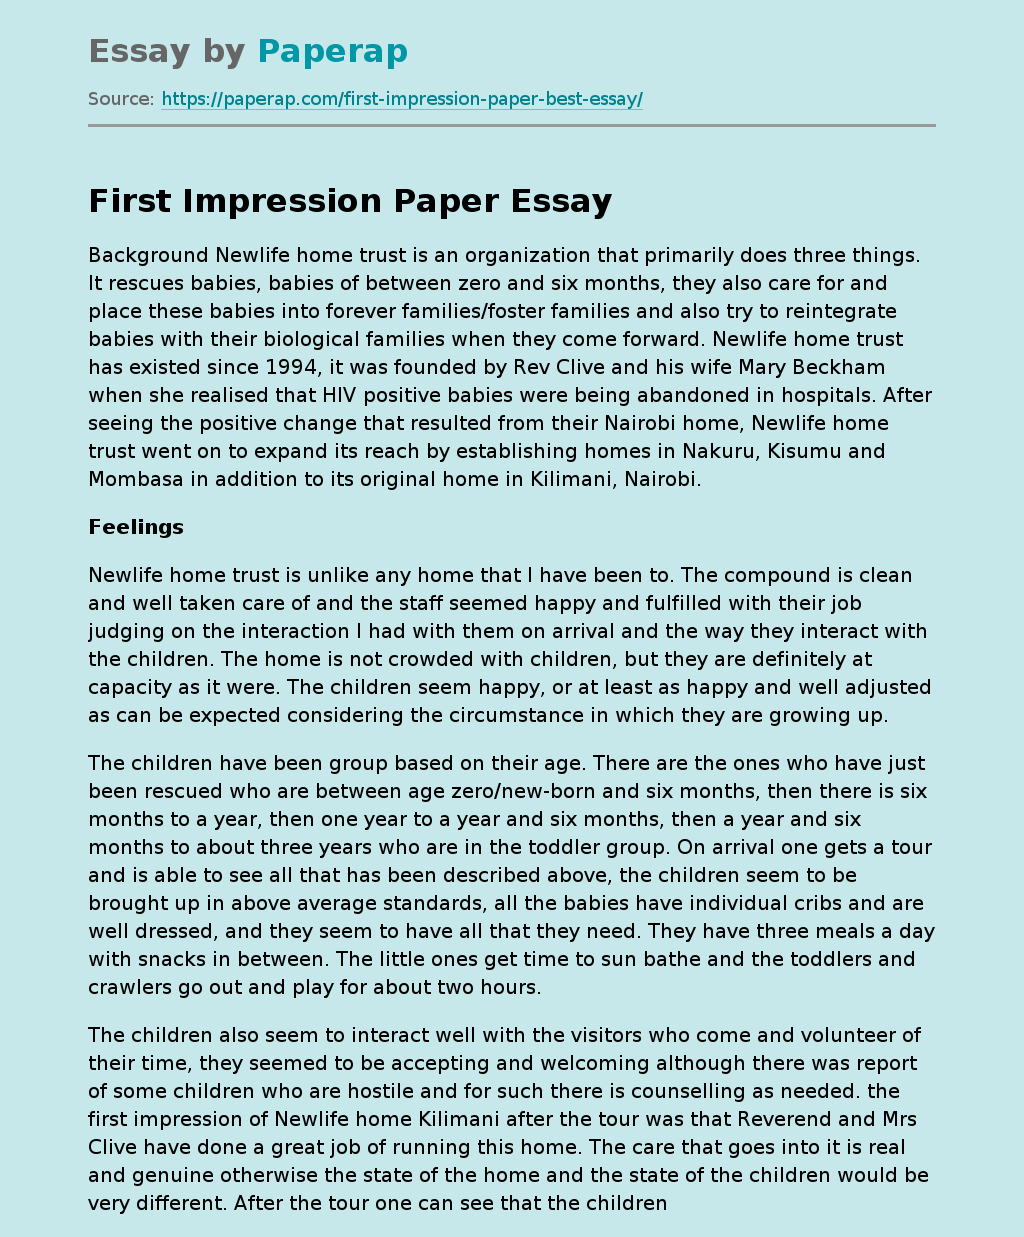 First Impression Paper